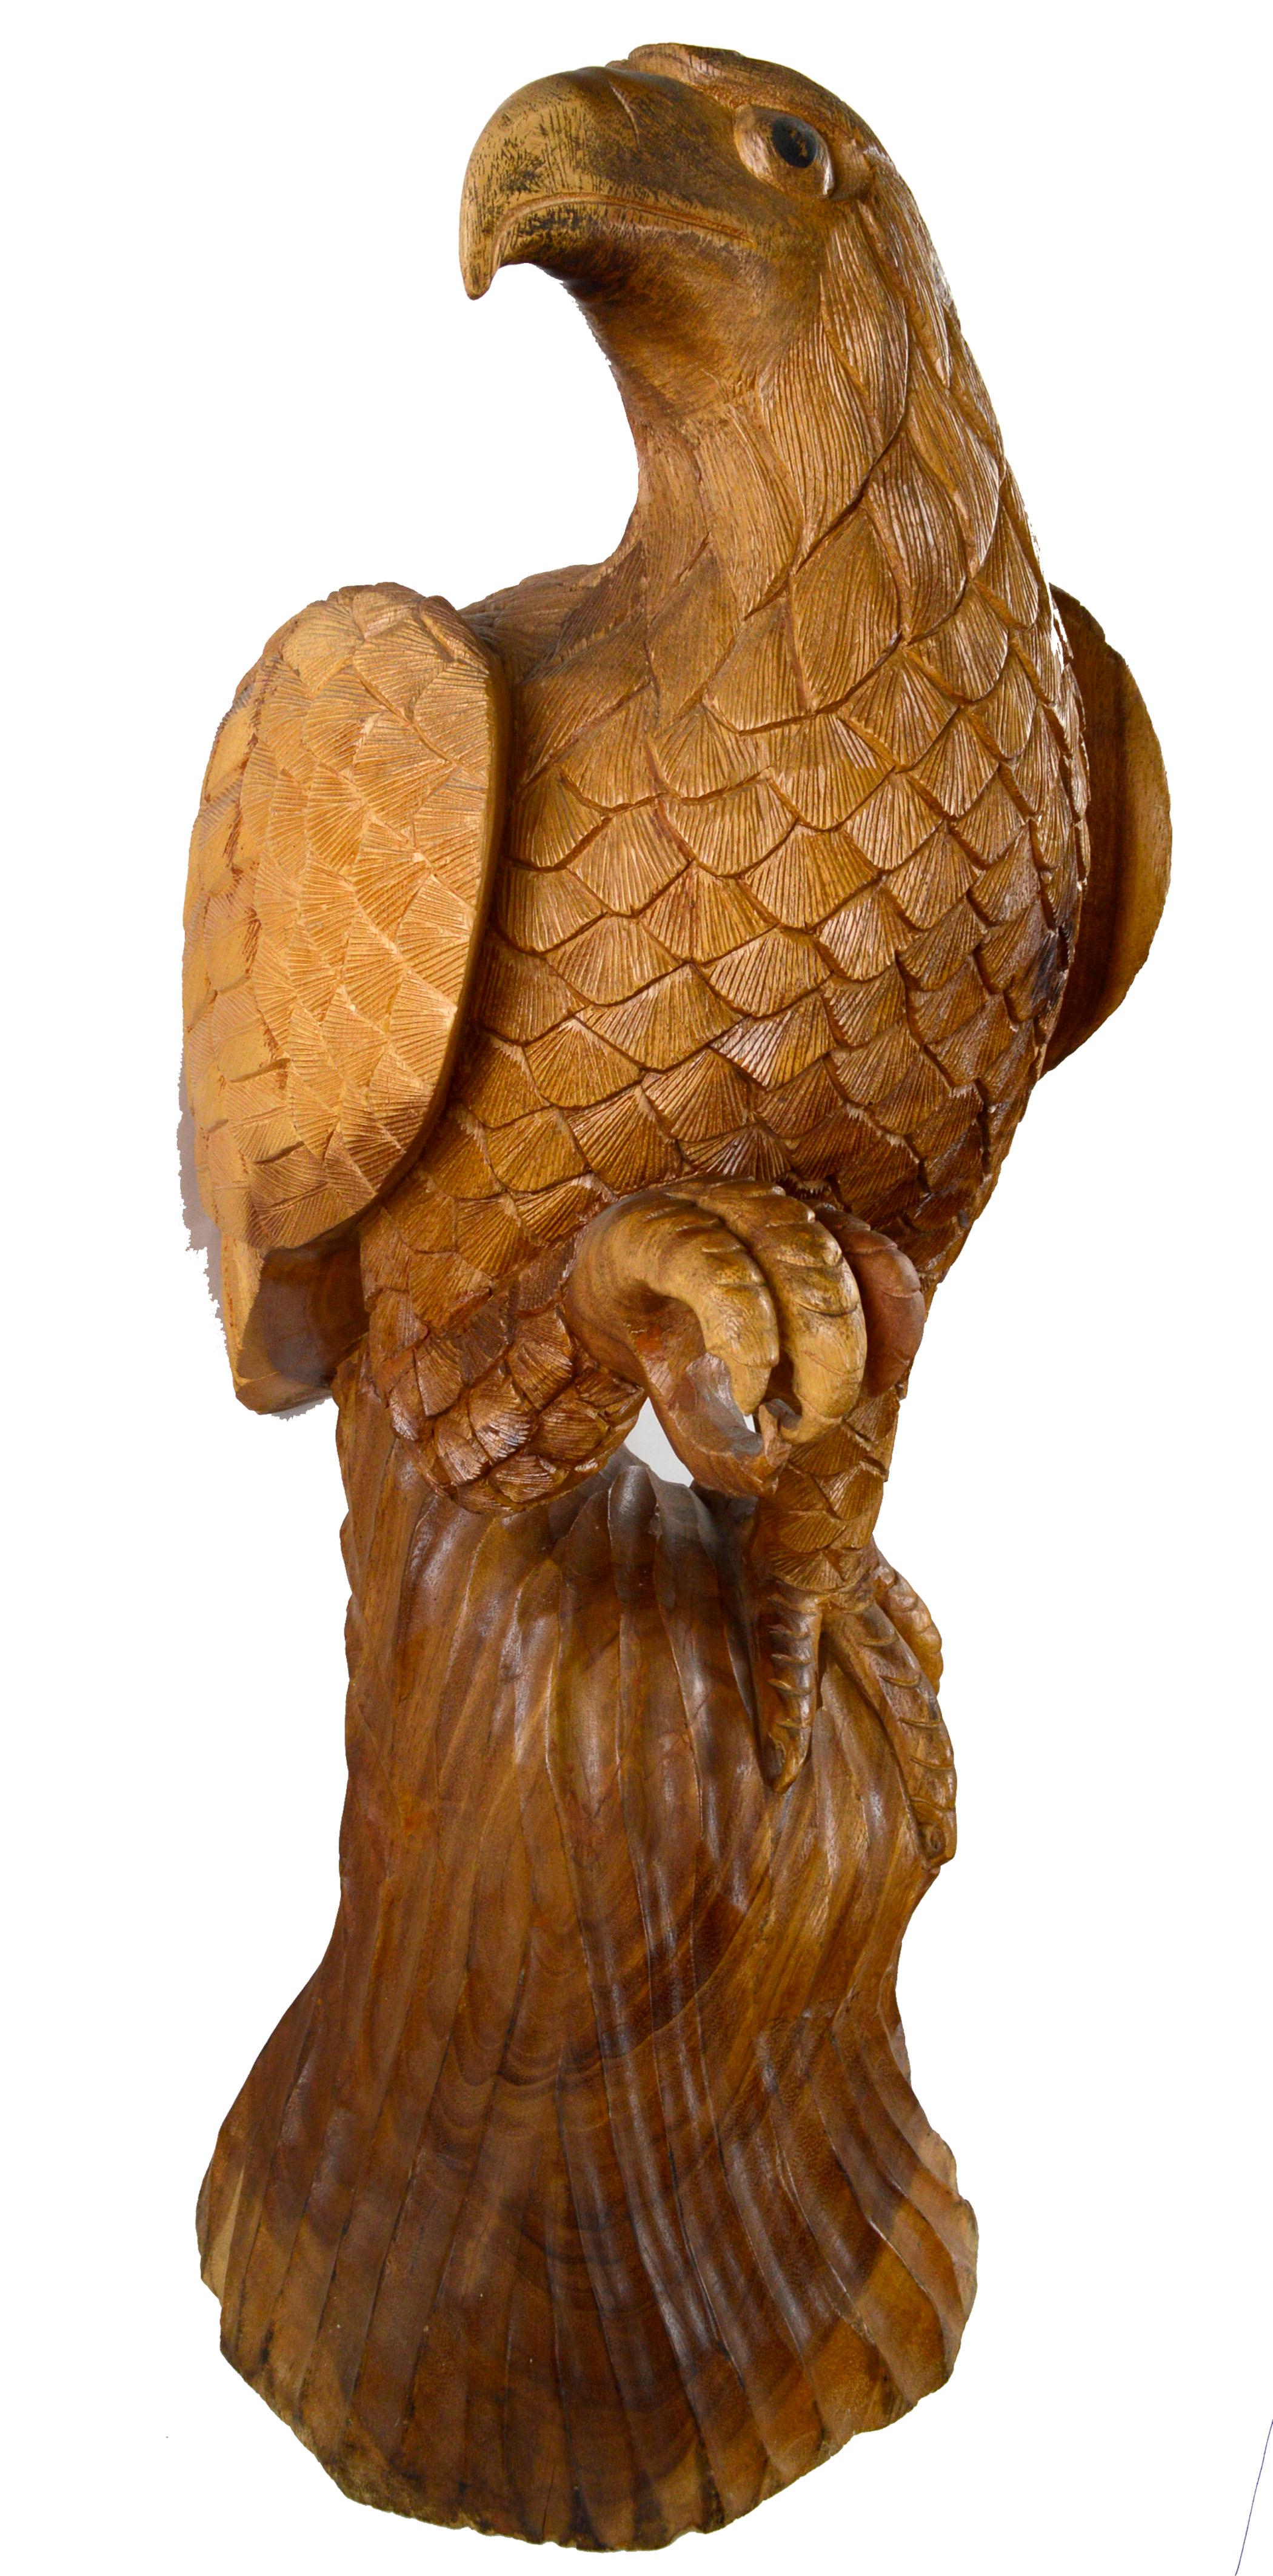 Hand carved solid wood sculpture of a perched eagle by an unknown artist, possibly a Bahamian local carver, c.1960s. Exquisite attention to detail and an elegant, subtle pose. Unsigned. Measures 35.5